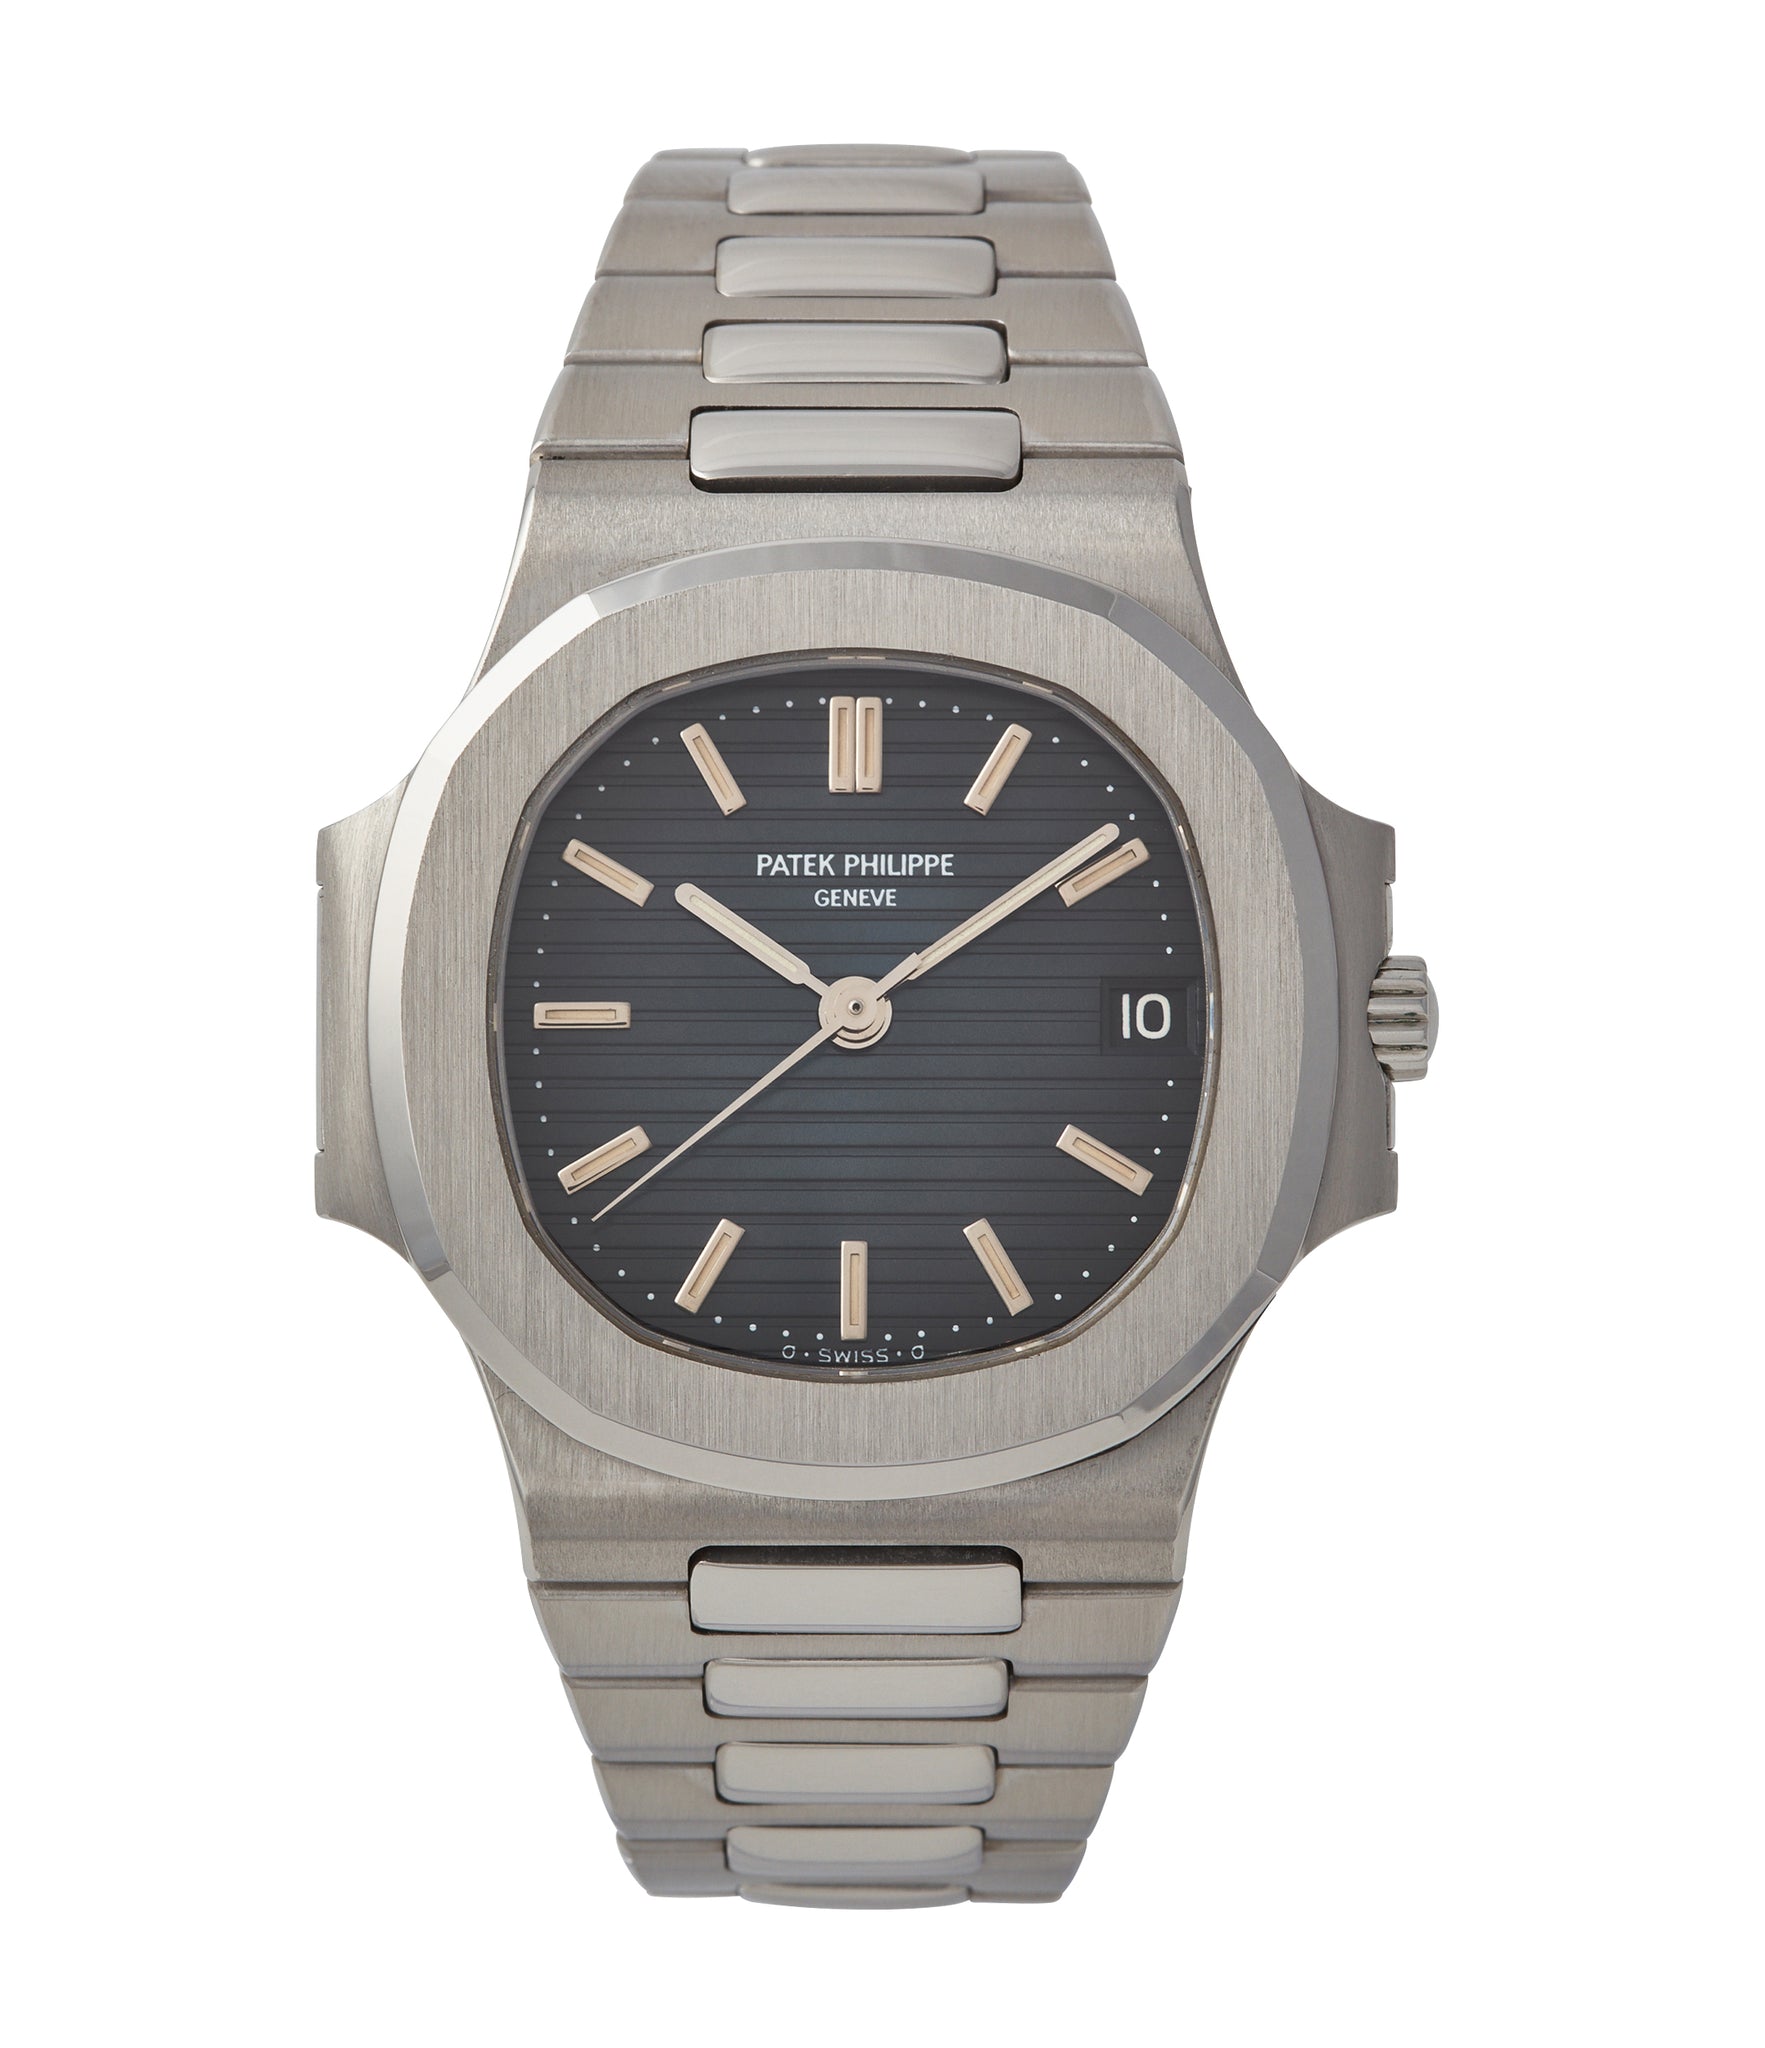 Patek Nautilus 3800/1 Sigma steel luxury sports watch for sale online A Collected Man London UK specialist of rare watches